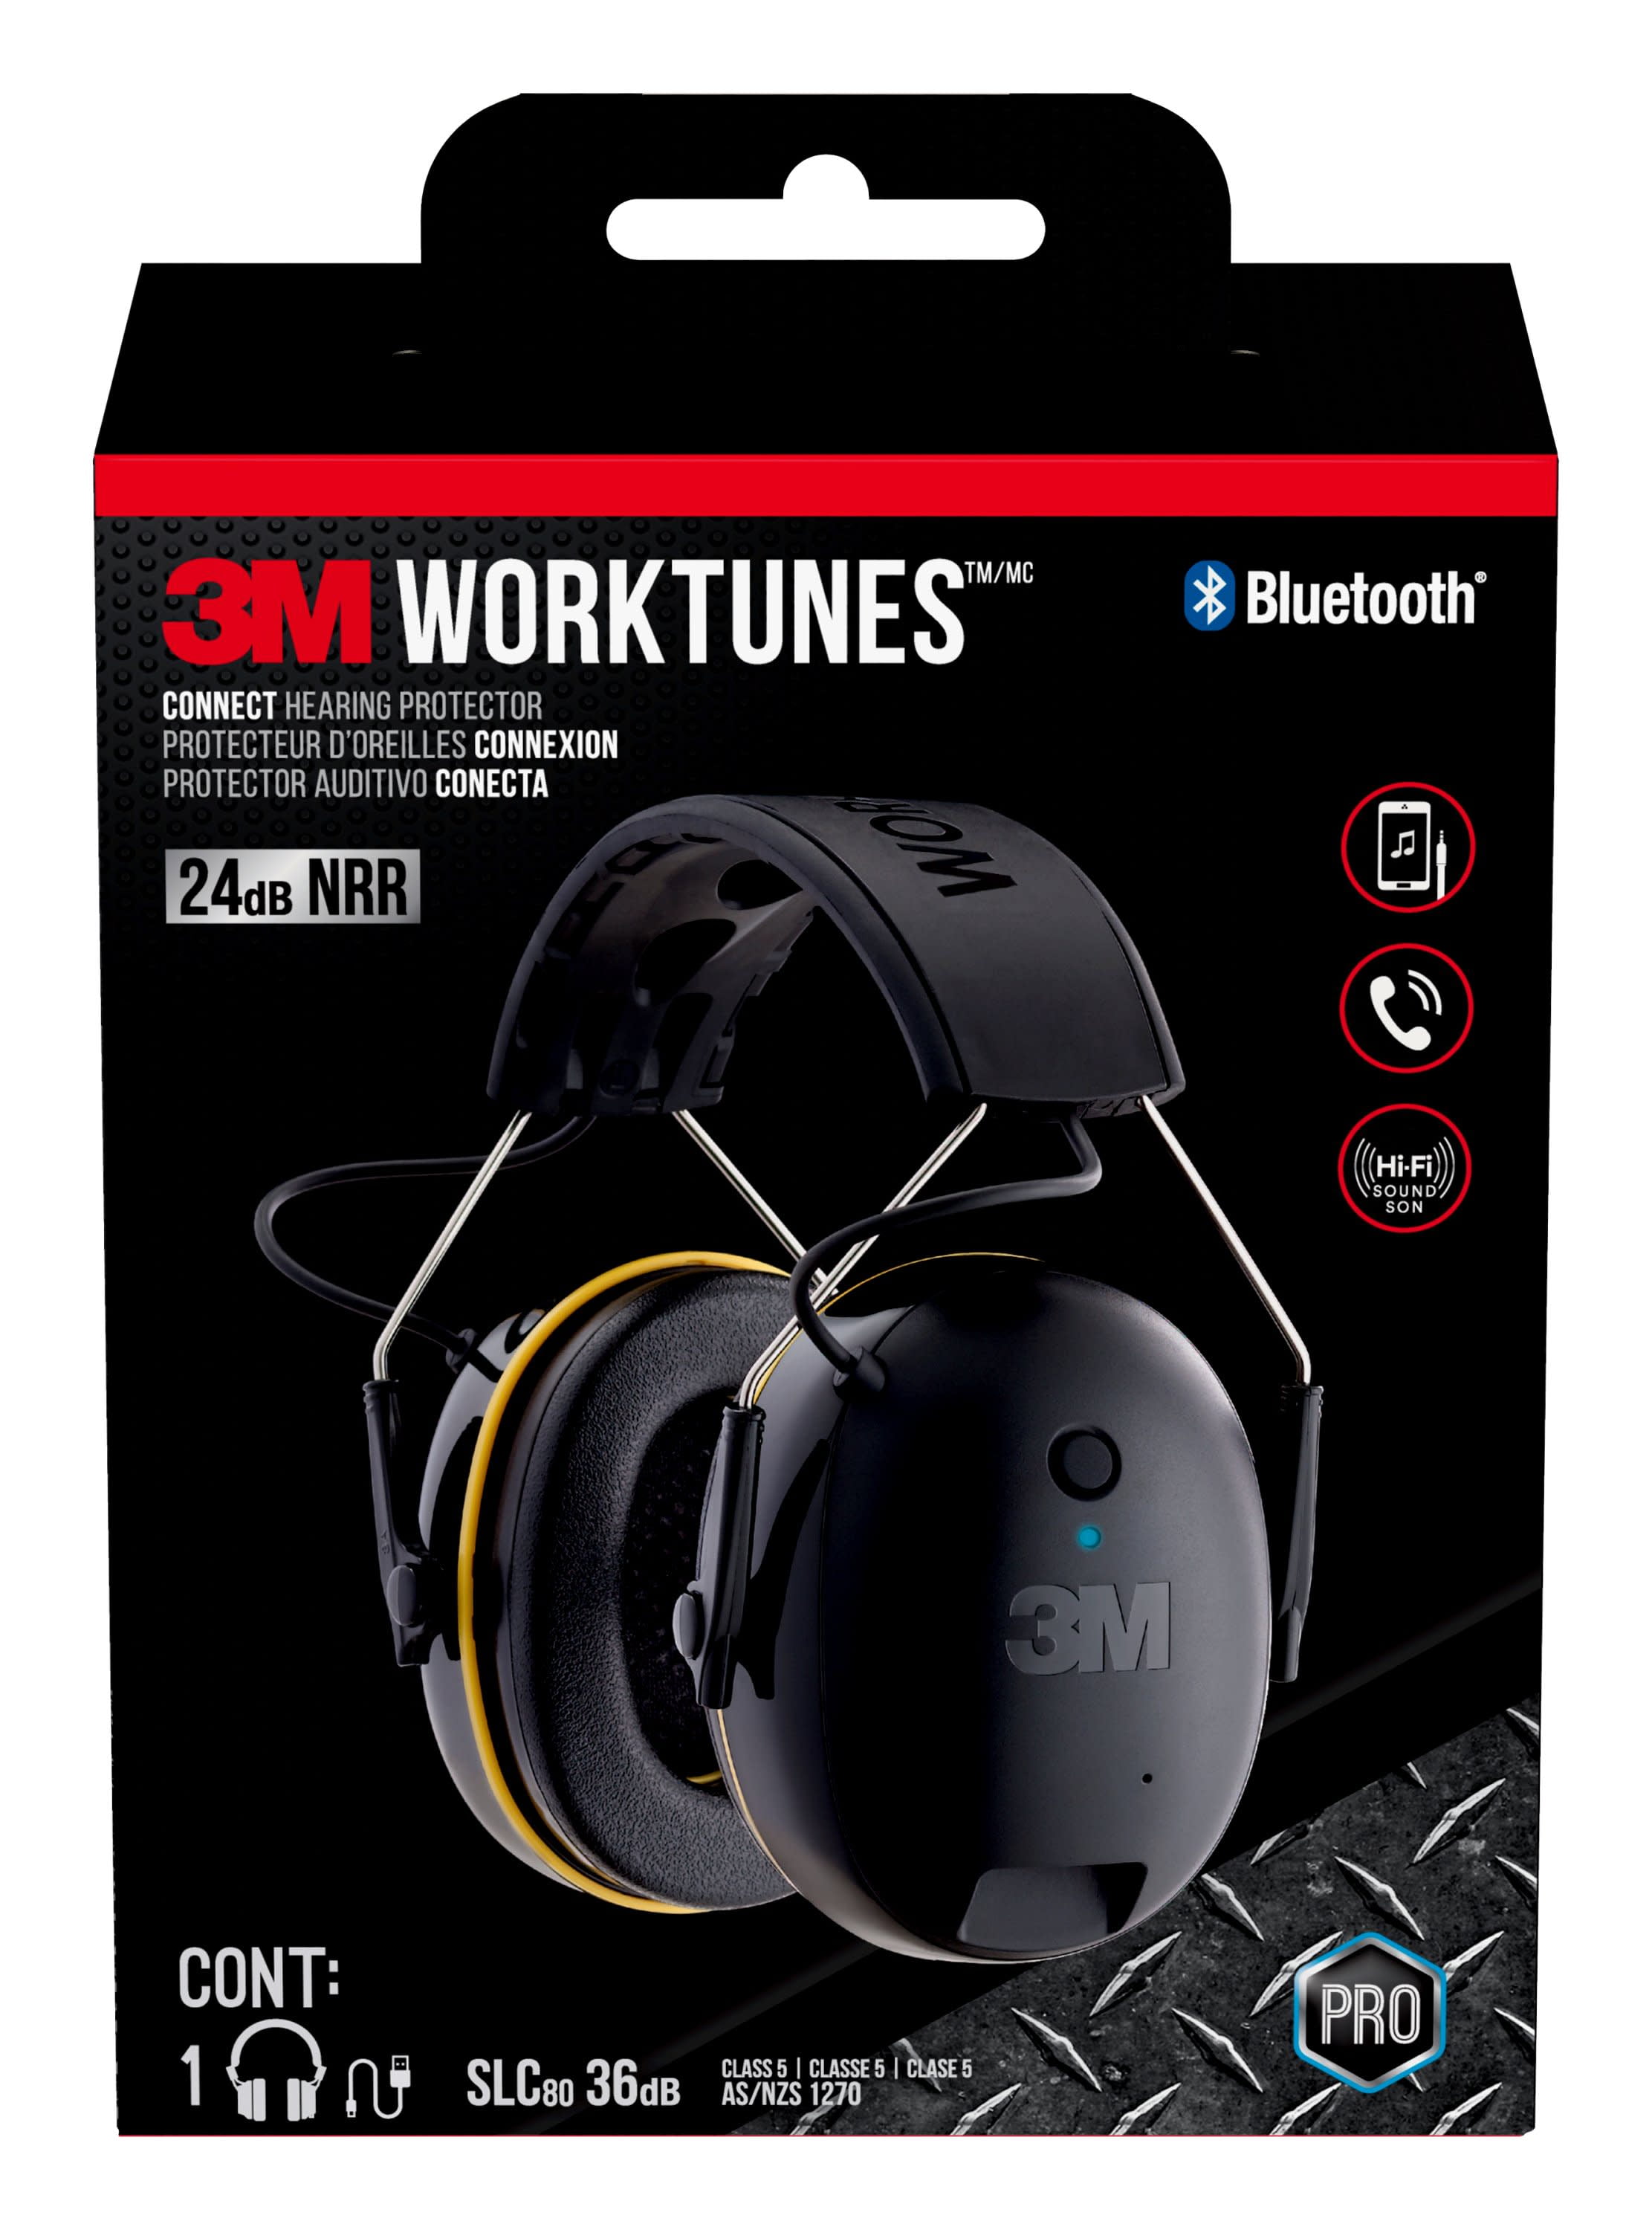 3M WorkTunes Connect Ear Protection with Bluetooth, Rechargeable